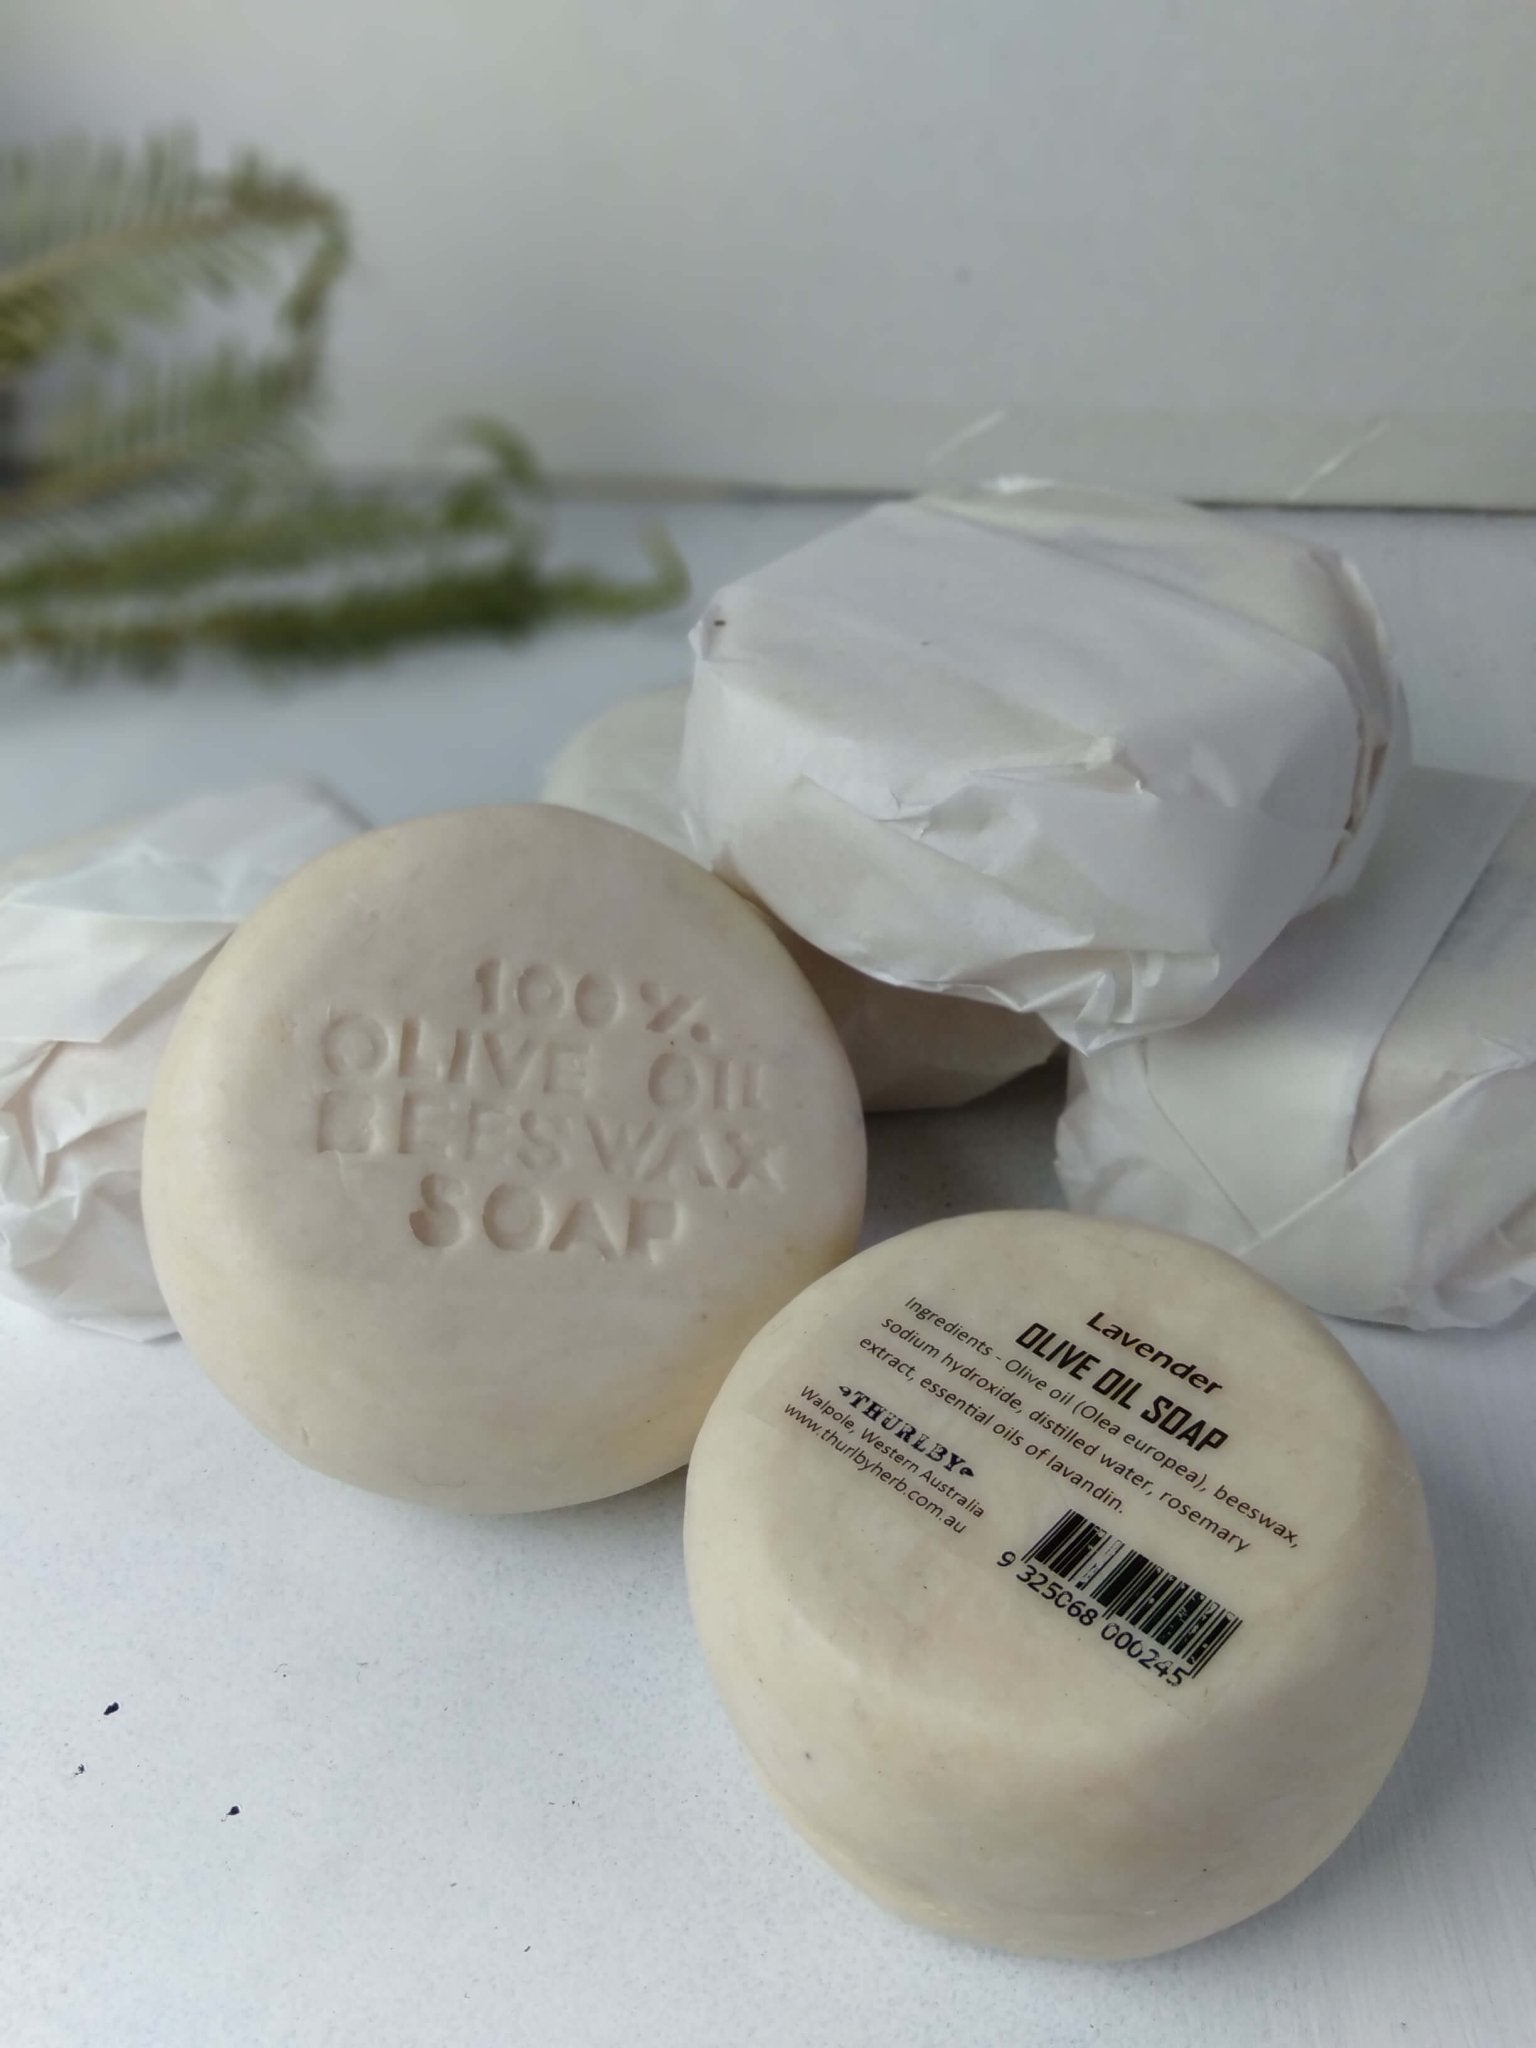 Thurlby Herb Farm Olive Oil Beeswax Soap Stone